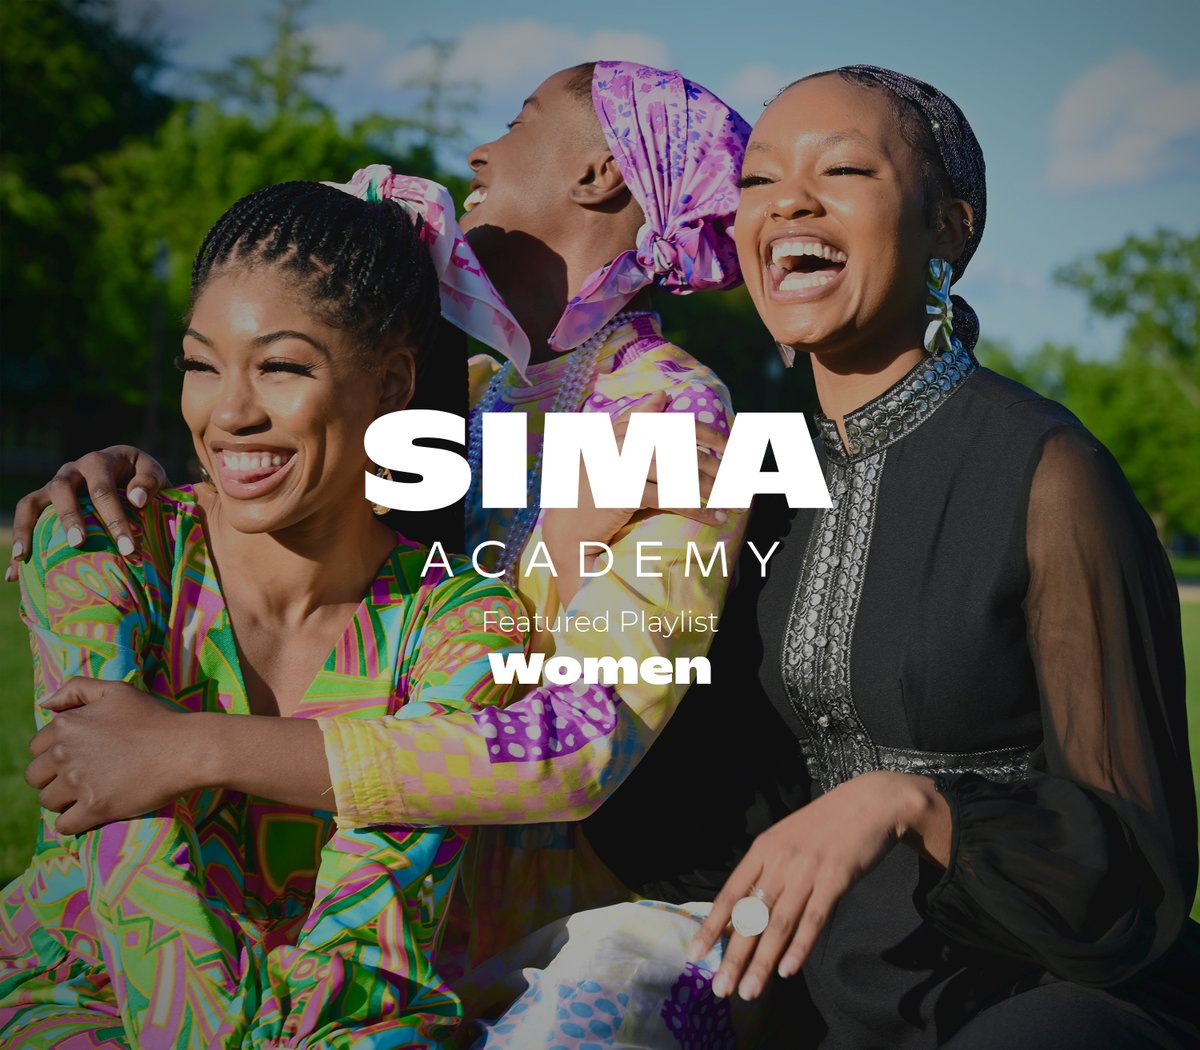 Happy #InternationalWomensDay — Experience 45+ short #documentaries spotlighting stories of women standing up, speaking out, innovating, building community, and being resilient. simaacademy.tv/browse New to SIMA Academy? Subscribe for free for 7-days: bit.ly/Subscribe2SIMA…